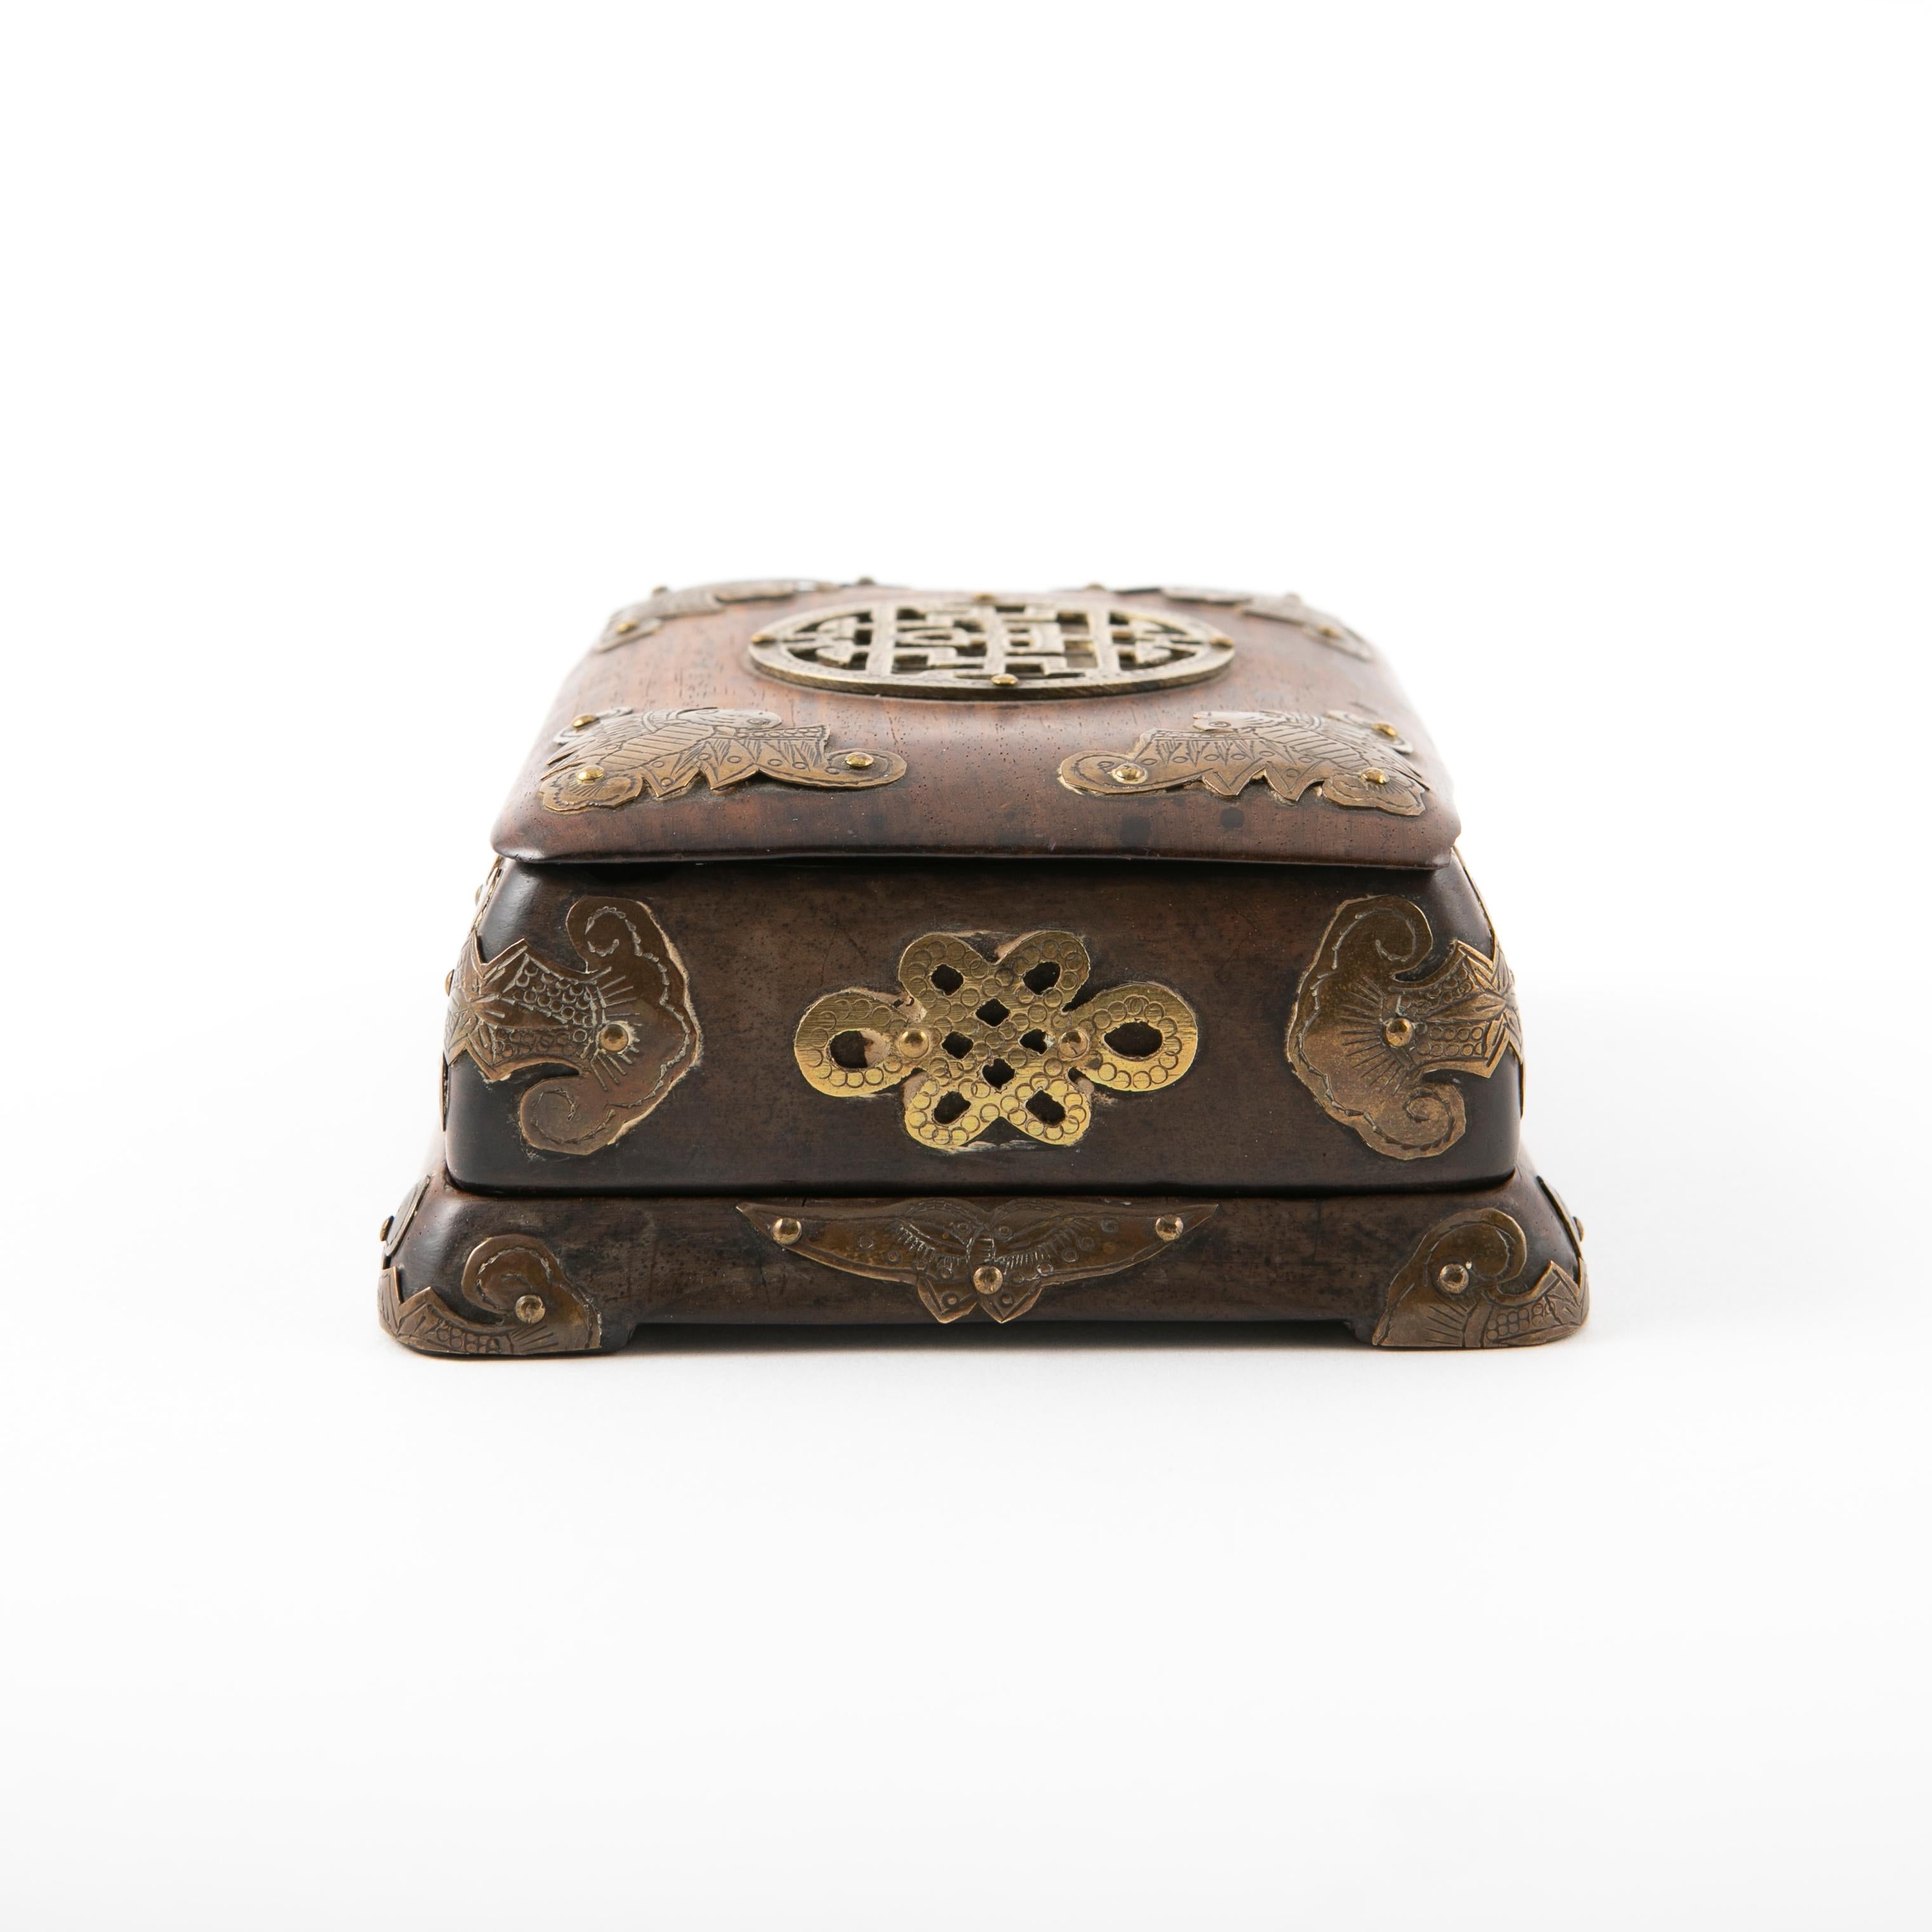 Chinese Qing Period Huanghuali Wood and Bronze Box For Sale 7